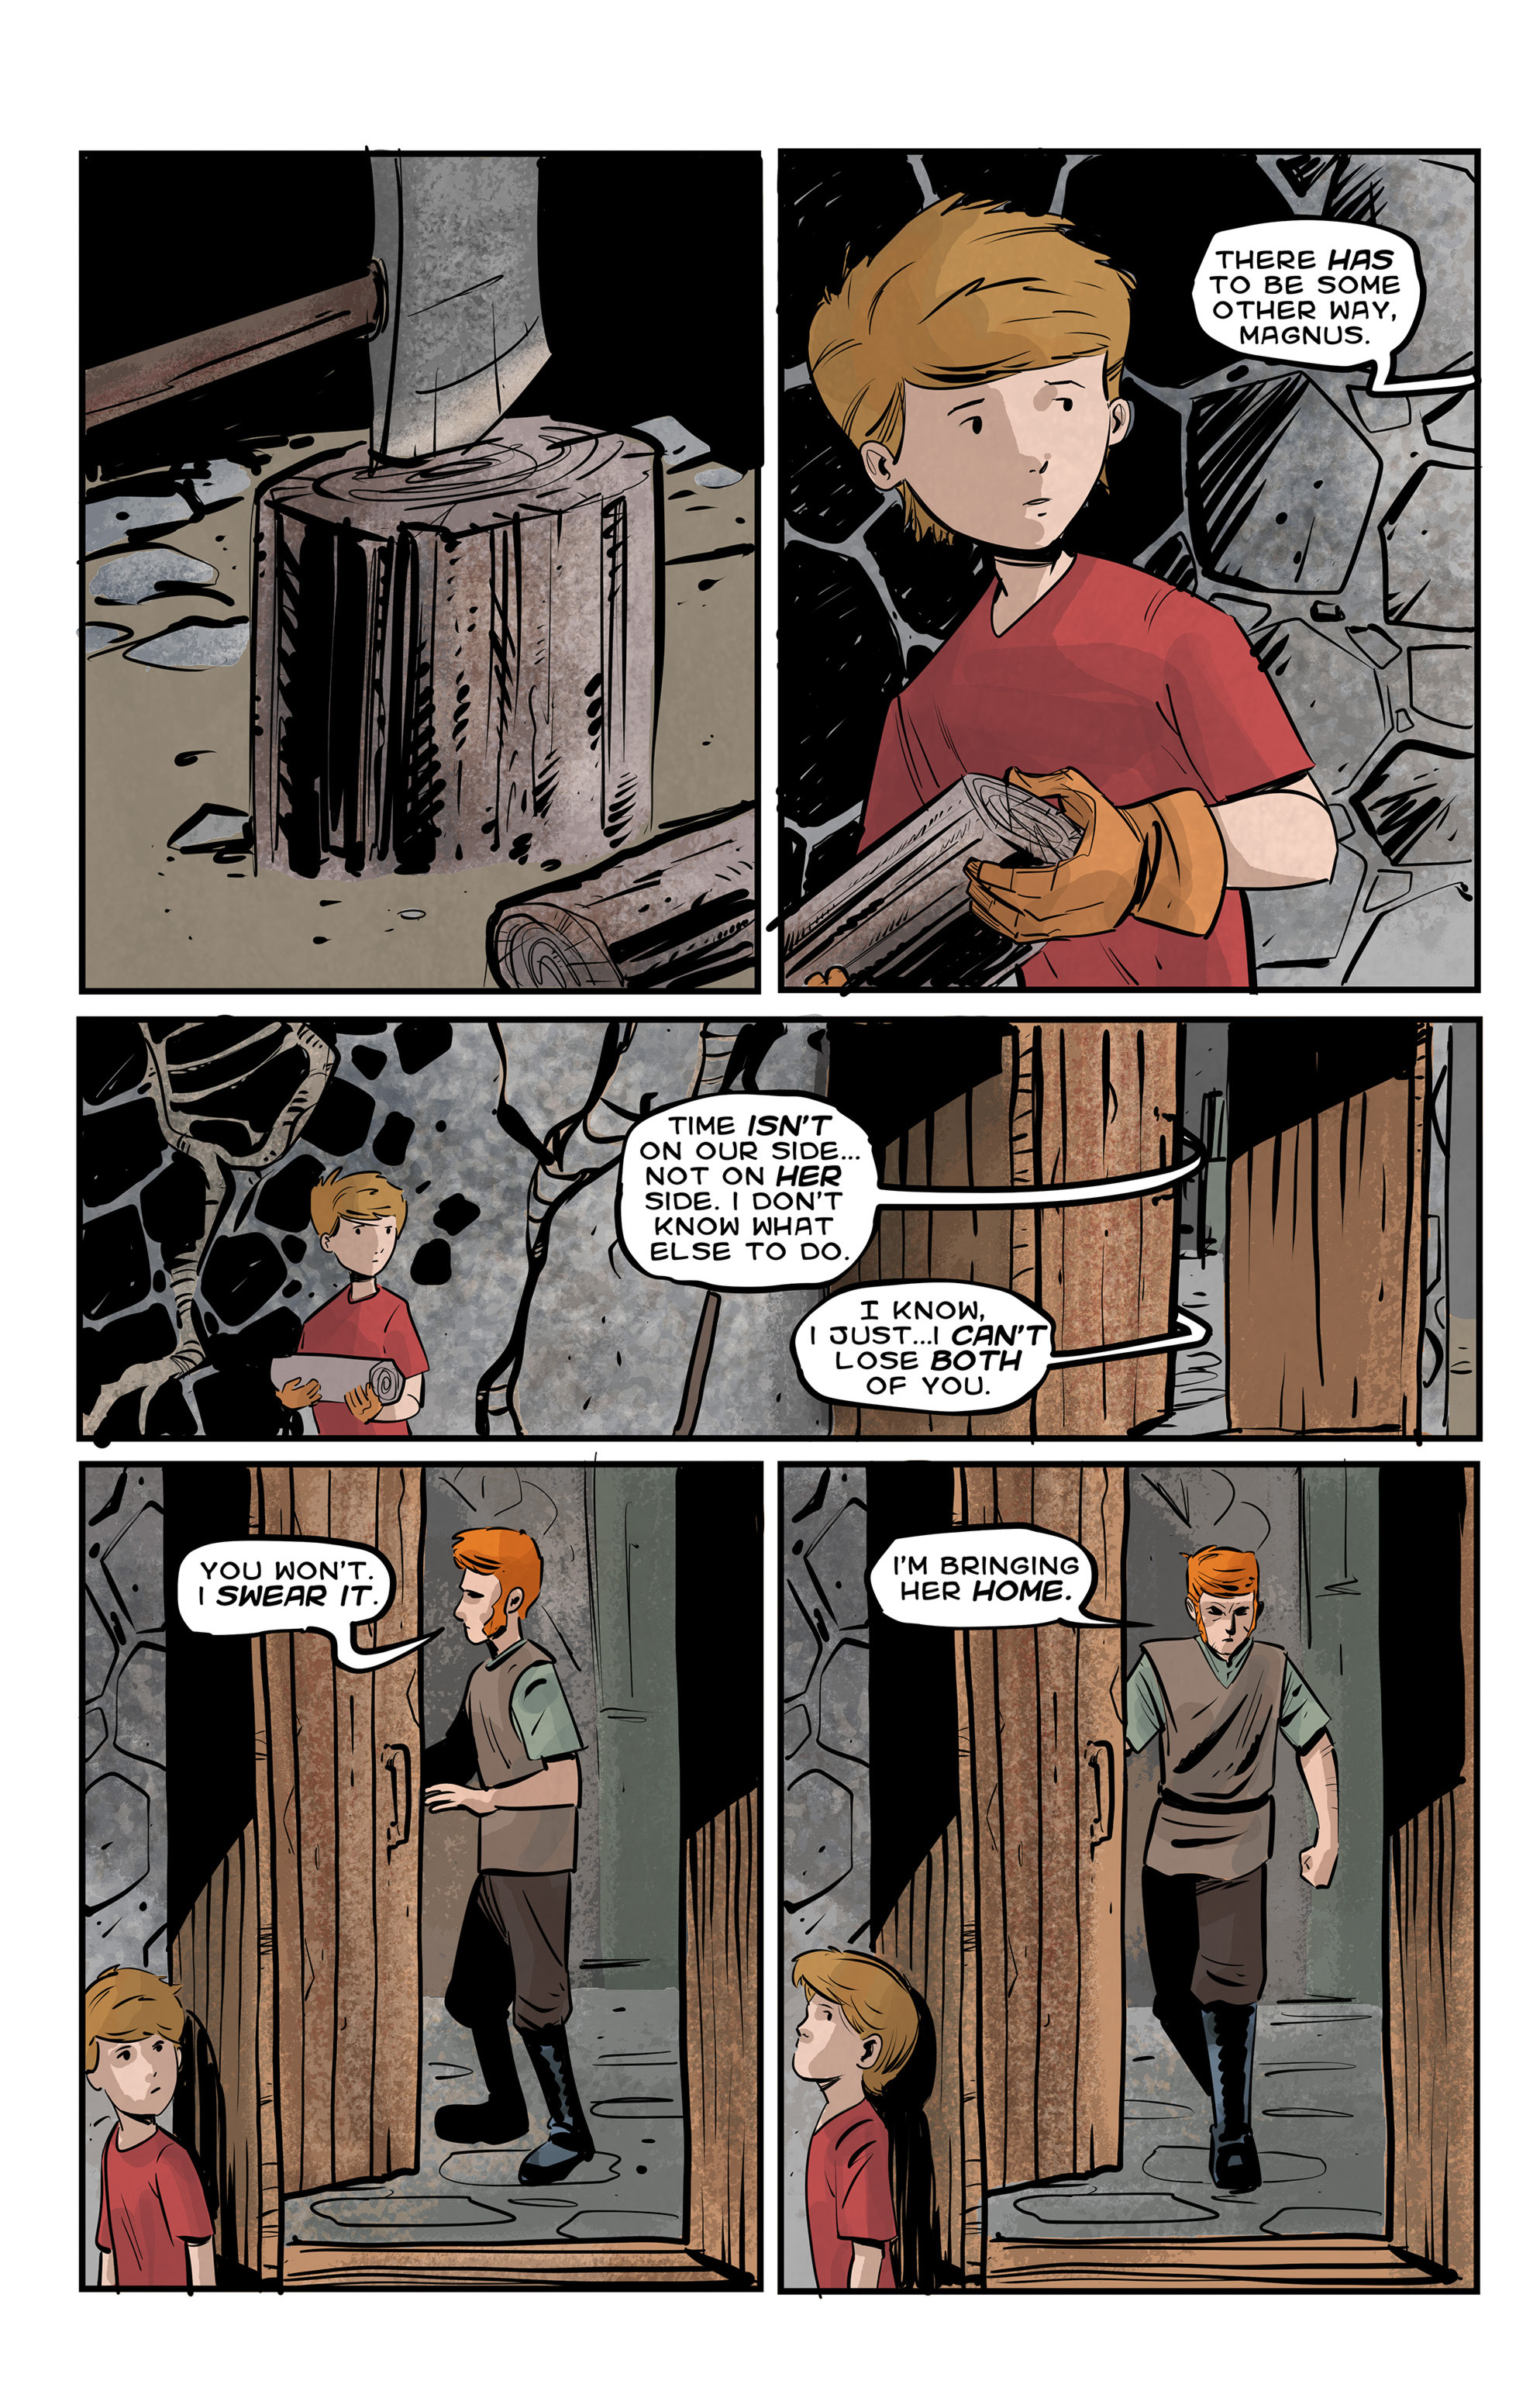 William the Last: Fight and Flight (2019-): Chapter 1 - Page 5